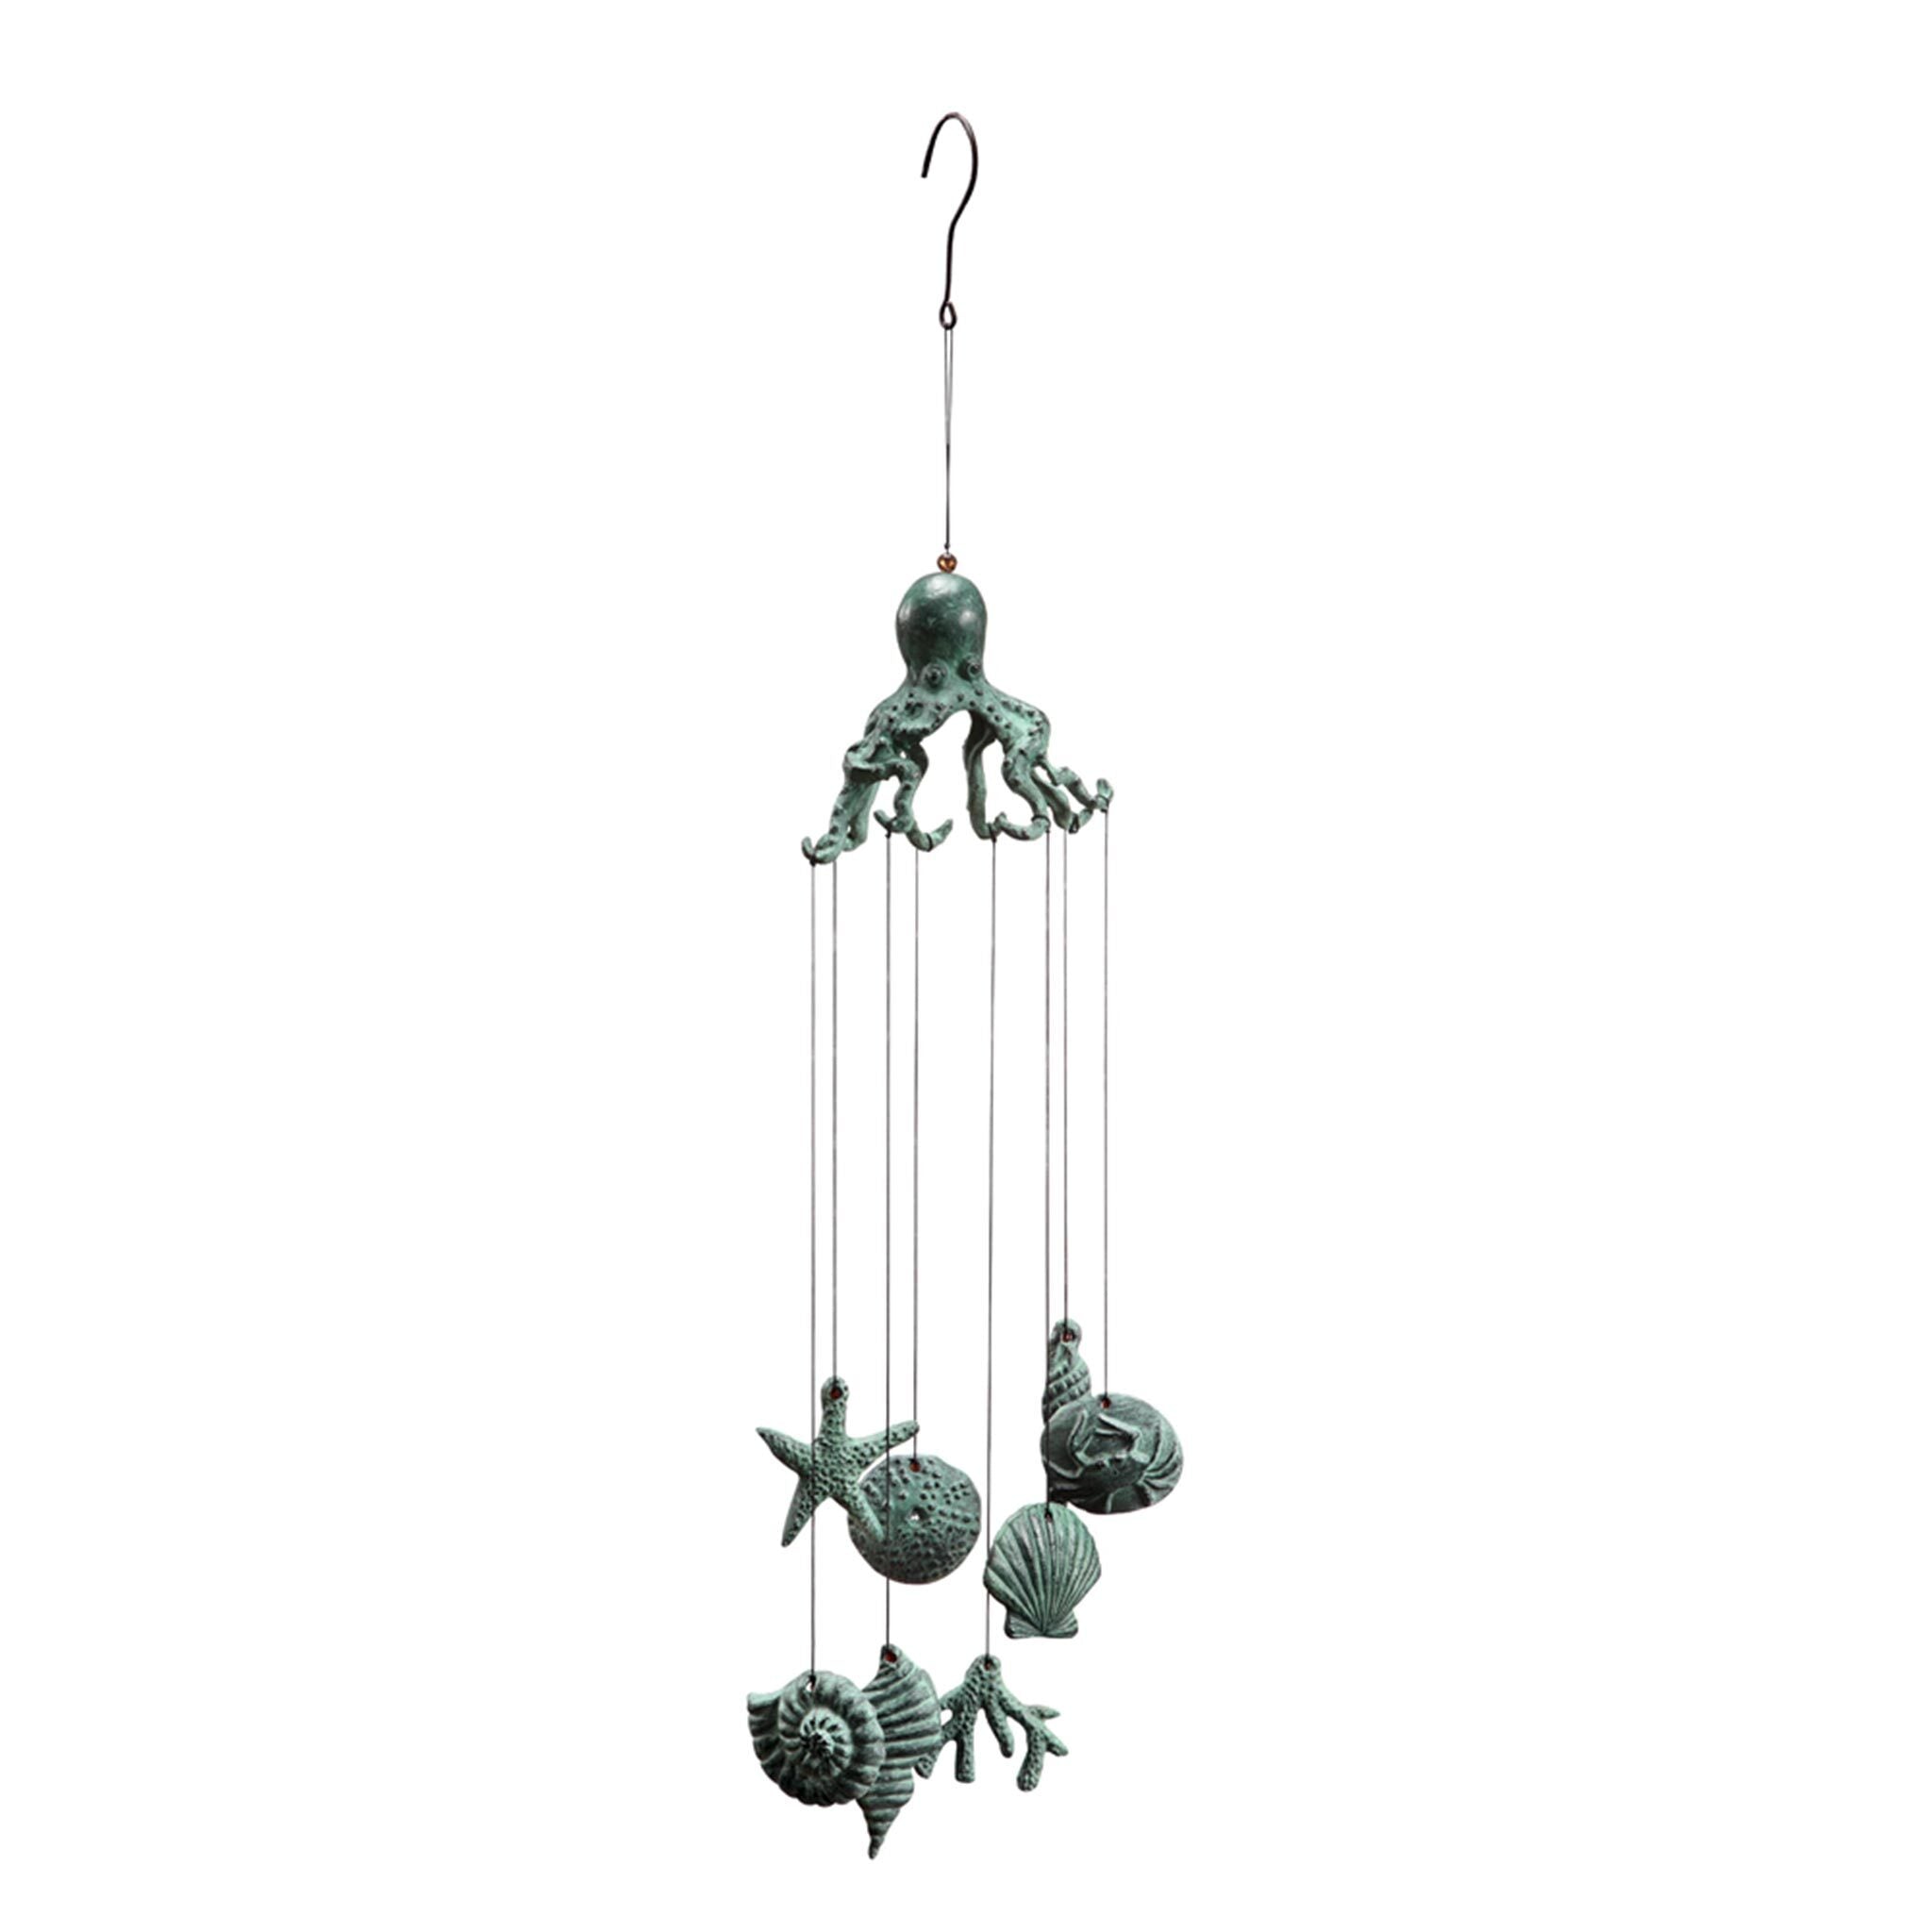 Octopus Wind Chime #1